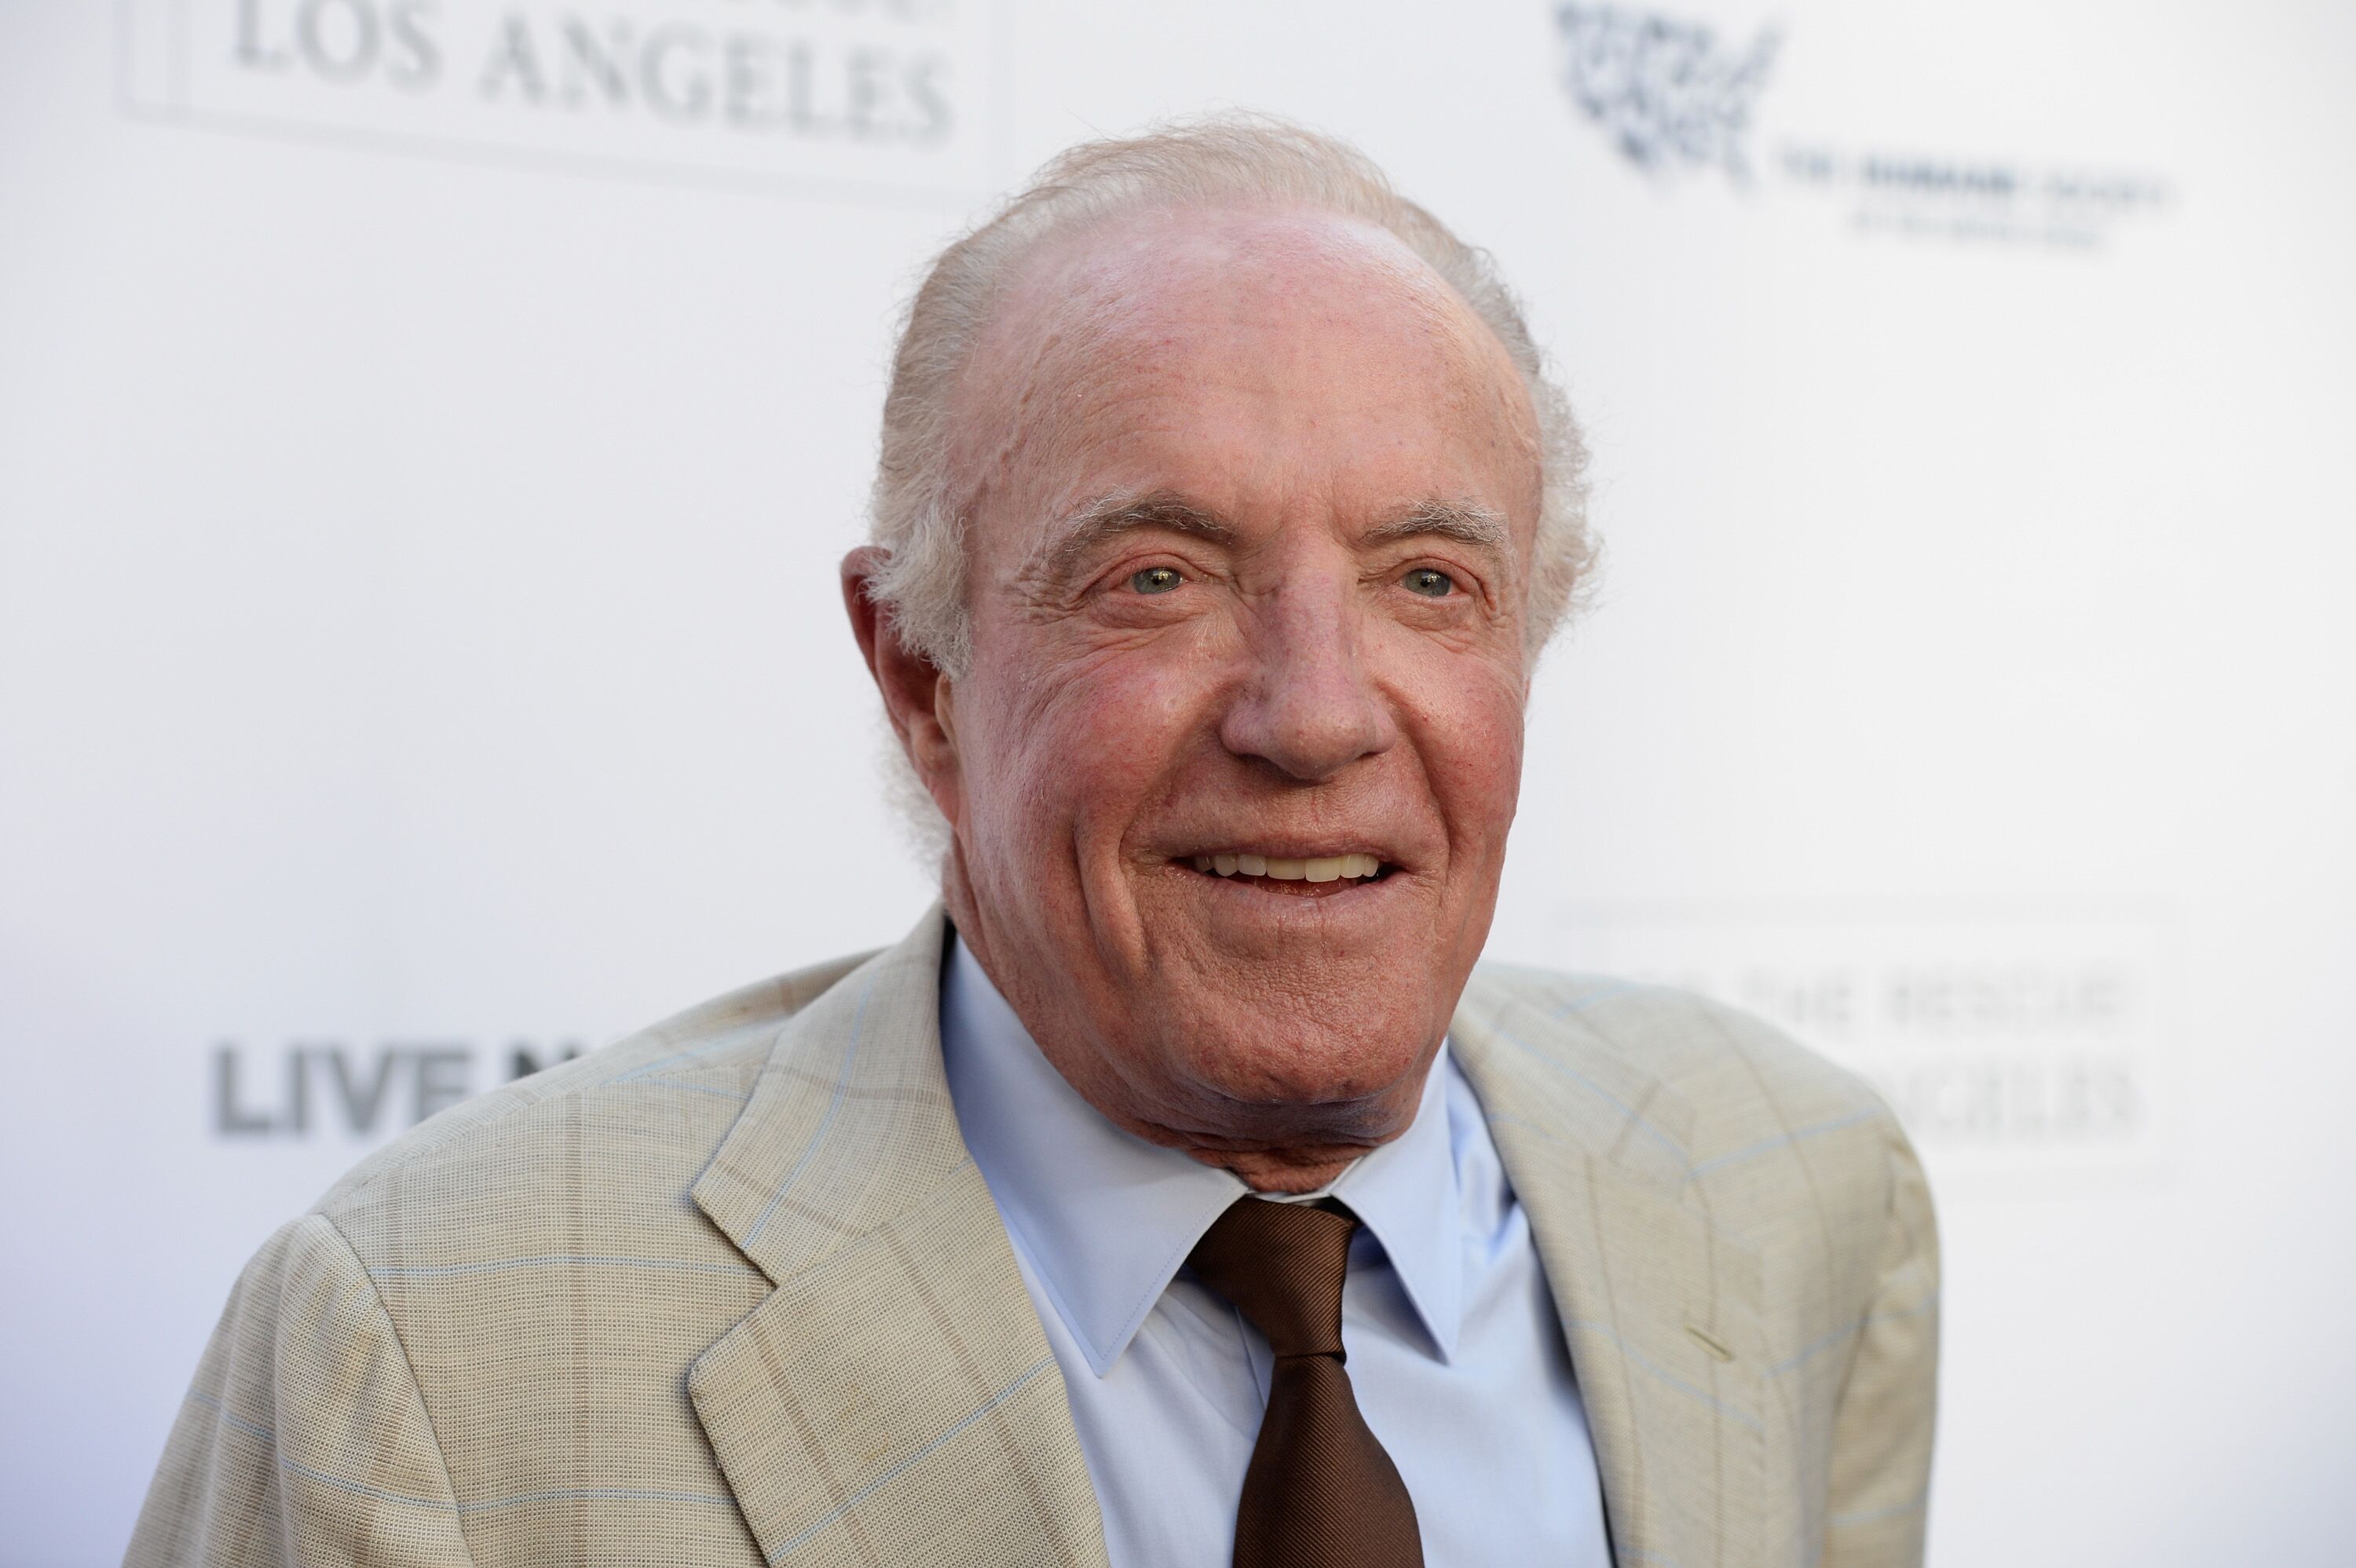 James Caan at The Humane Society of the United States' To the Rescue Los Angeles Gala at Paramount Studios on April 22, 2017 in Hollywood, California. | Source: Getty Images